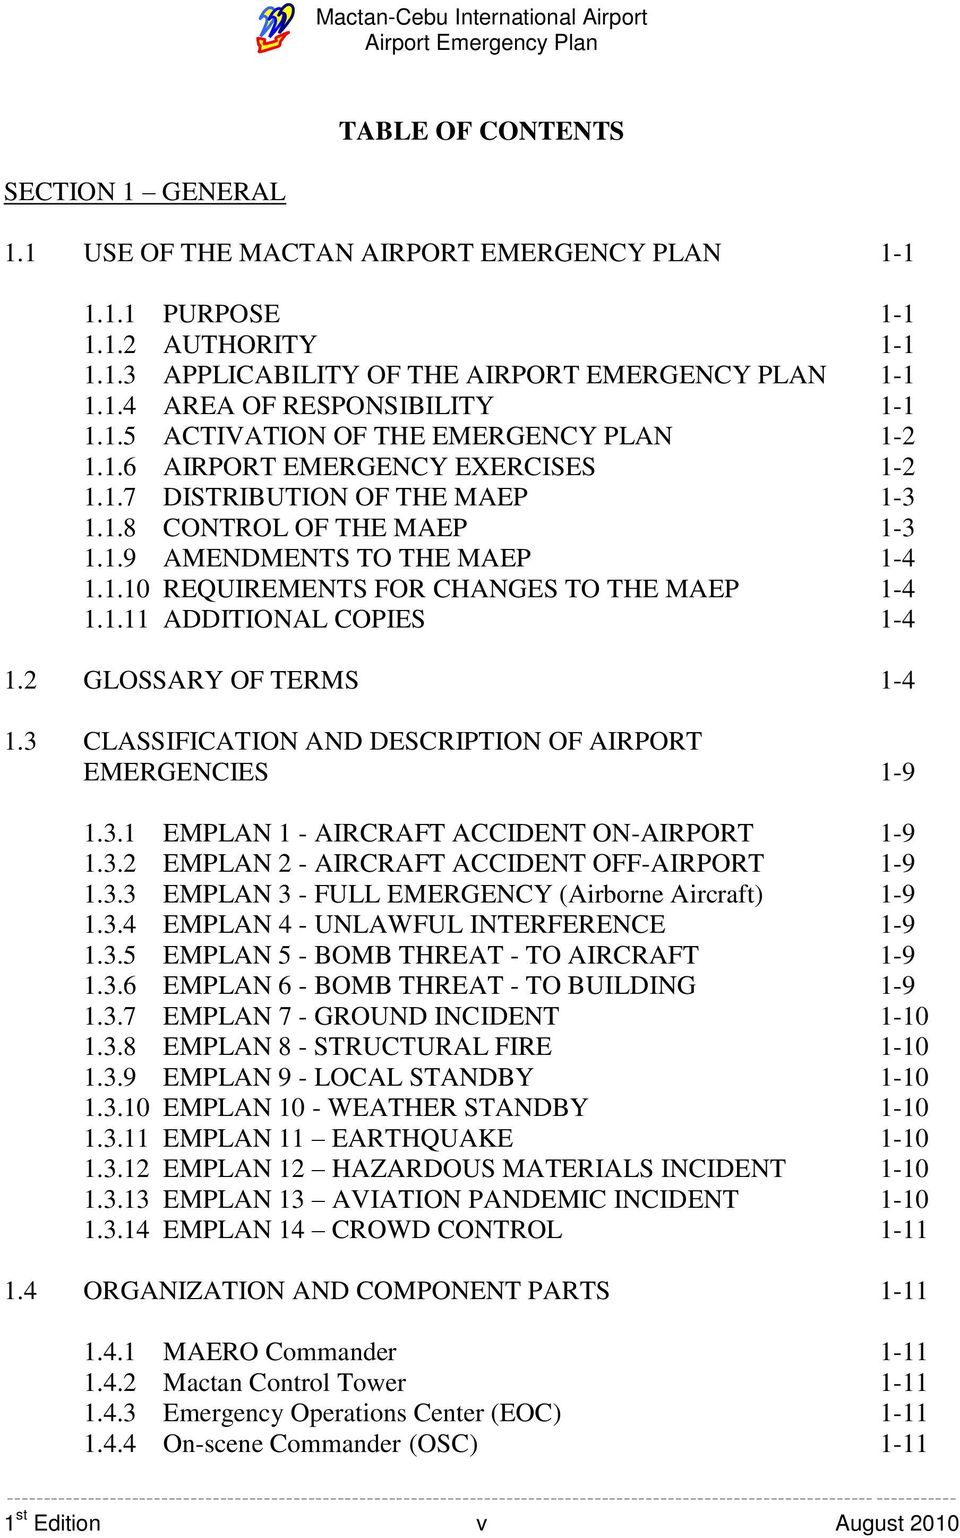 1.11 ADDITIONAL COPIES 1-4 1.2 GLOSSARY OF TERMS 1-4 1.3 CLASSIFICATION AND DESCRIPTION OF AIRPORT EMERGENCIES 1-9 1.3.1 EMPLAN 1 - AIRCRAFT ACCIDENT ON-AIRPORT 1-9 1.3.2 EMPLAN 2 - AIRCRAFT ACCIDENT OFF-AIRPORT 1-9 1.